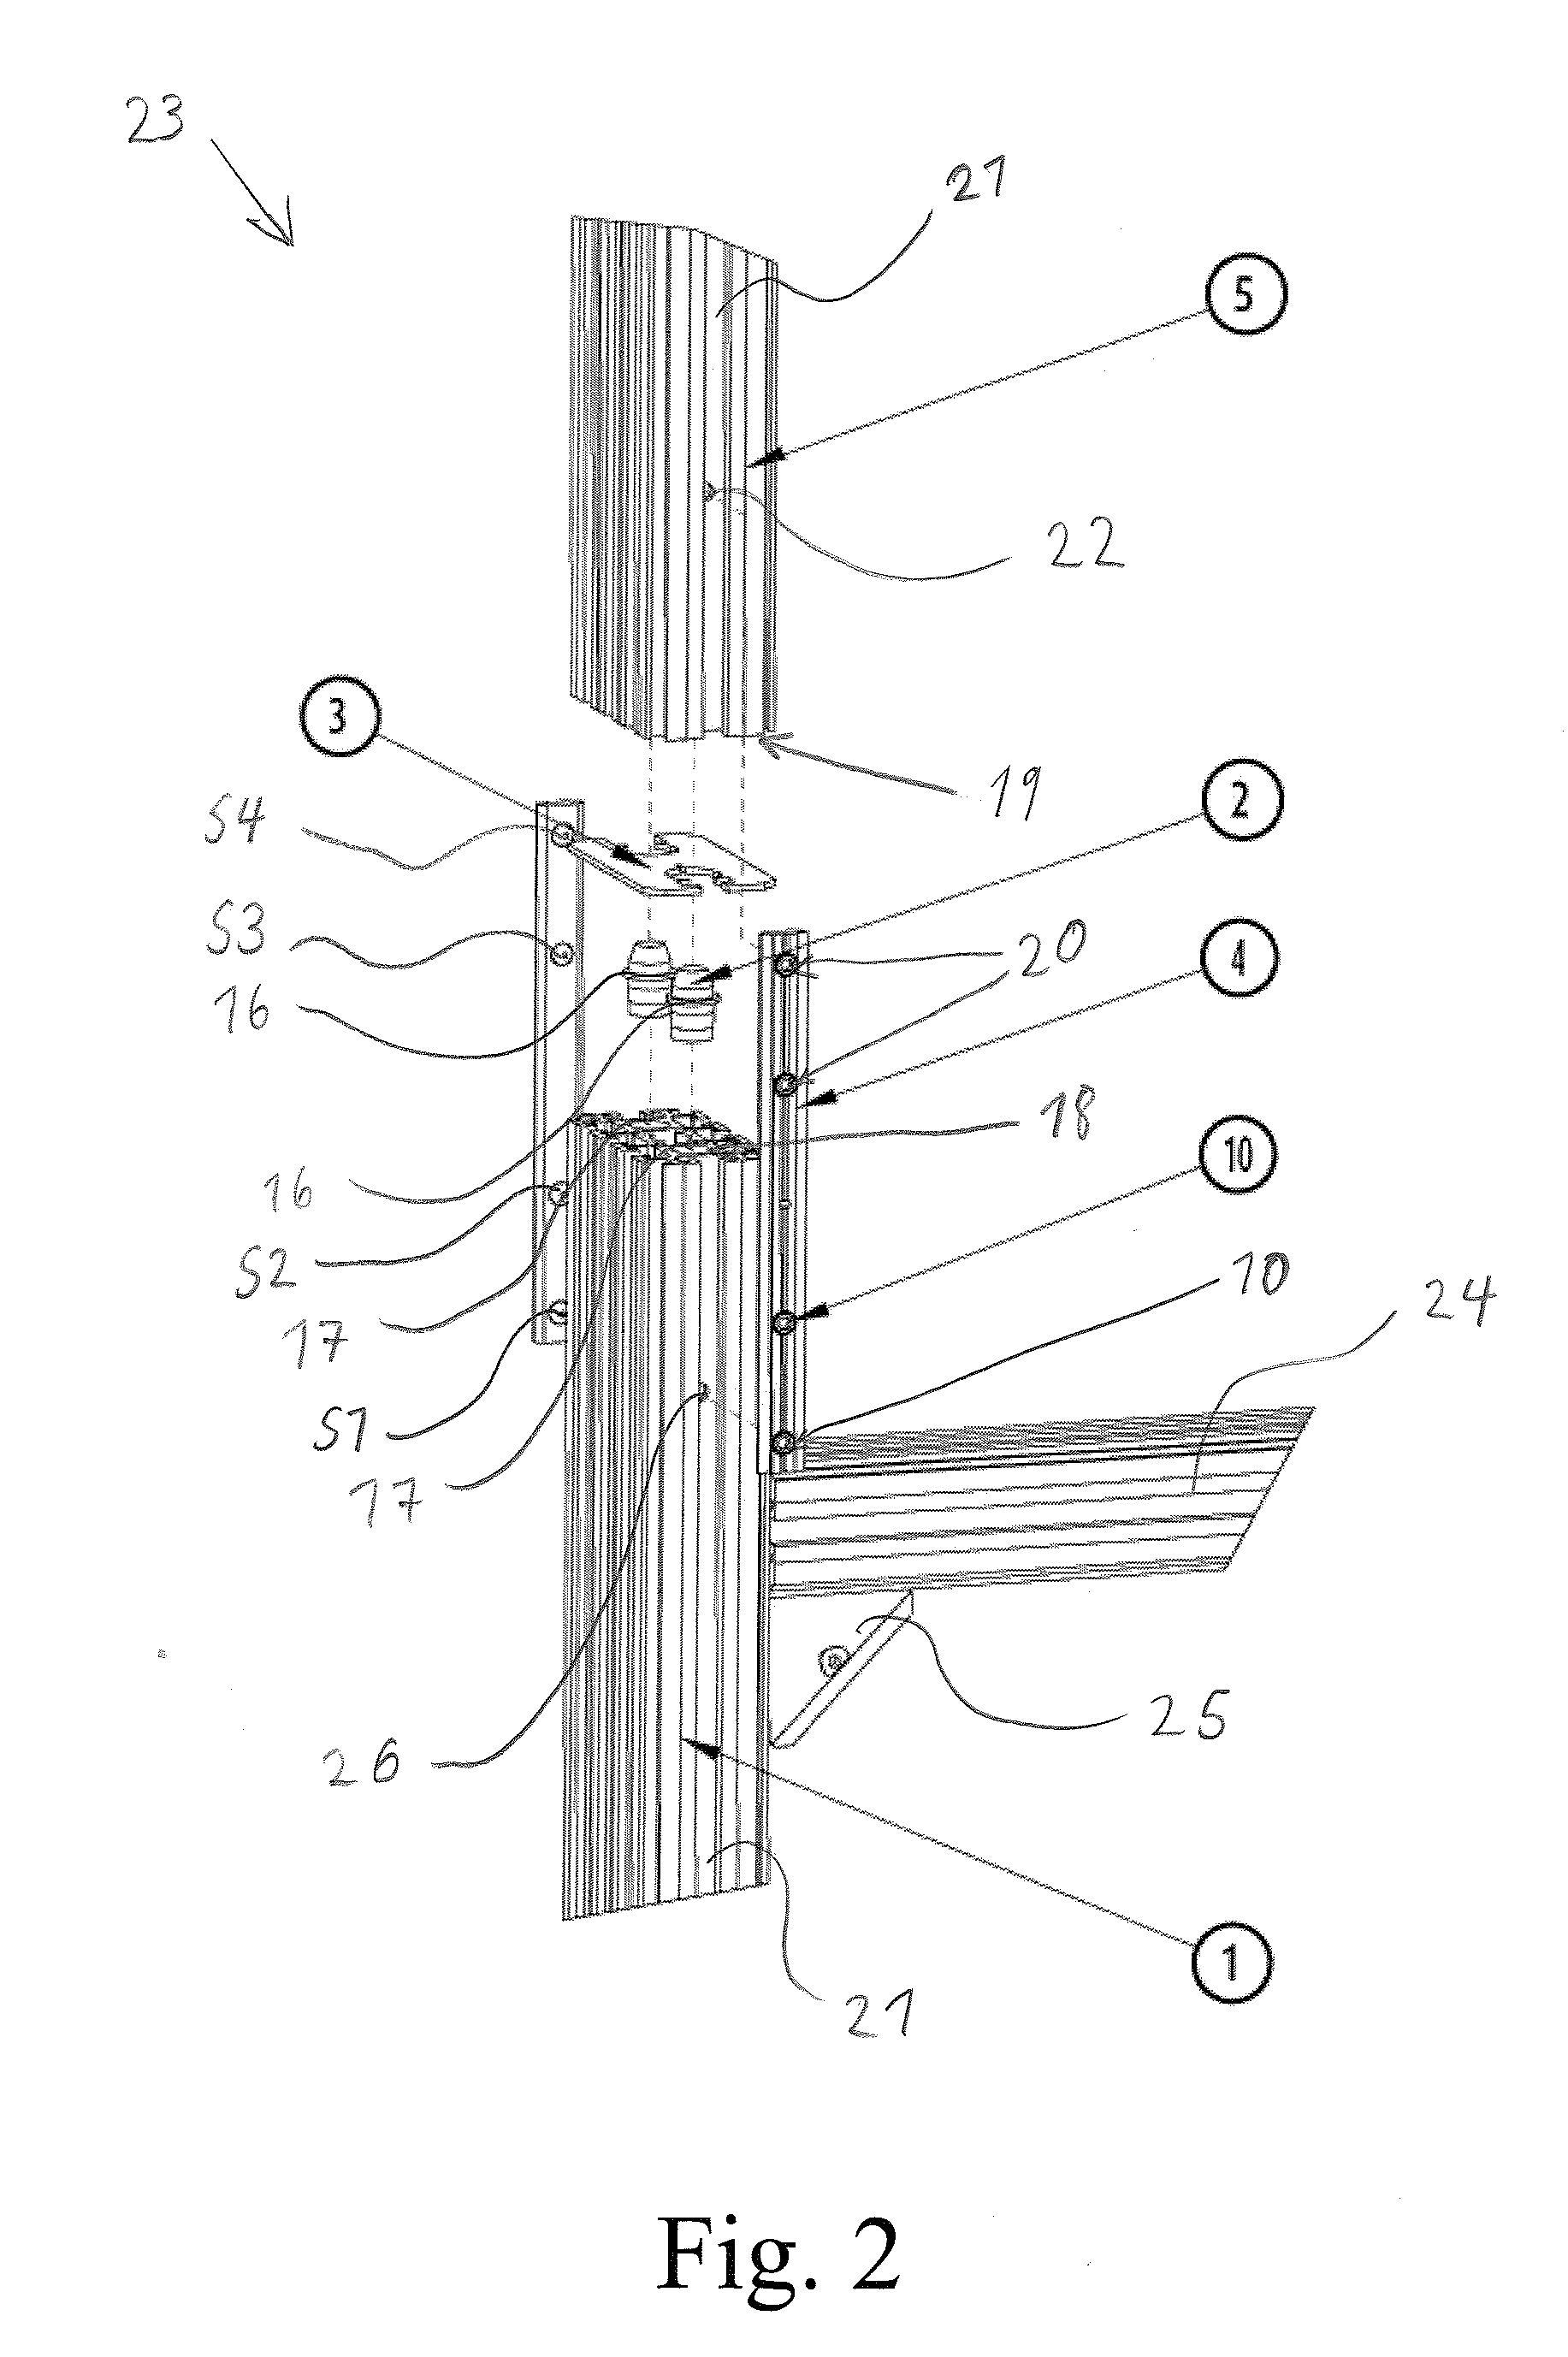 Spacer plate and support structure